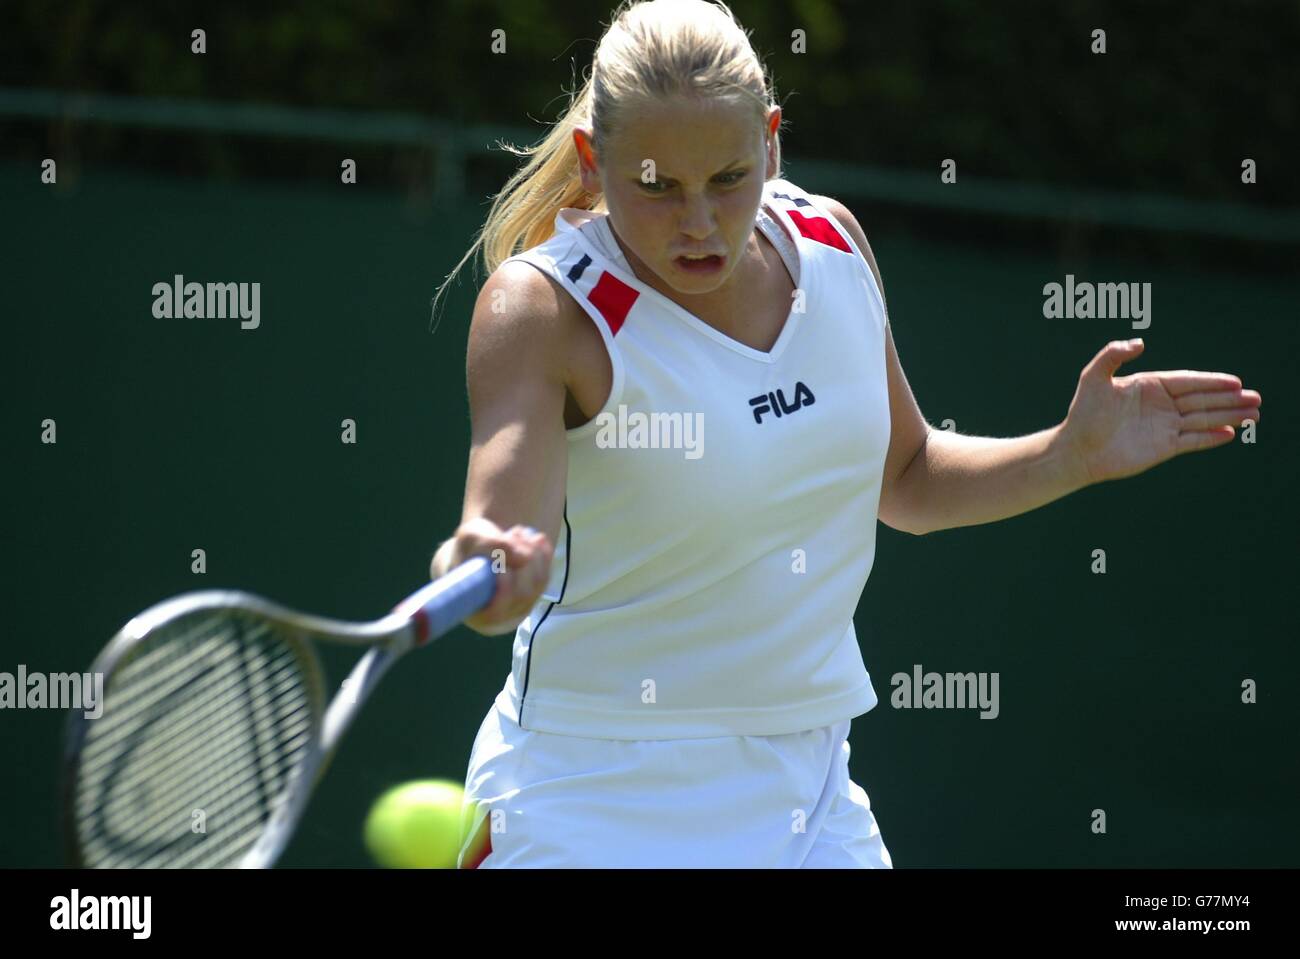 Jelena Dokic of Serbia Montenegro in action against Britain's Elena Baltacha at the All England Lawn Tennis Championships in Wimbledon. Stock Photo